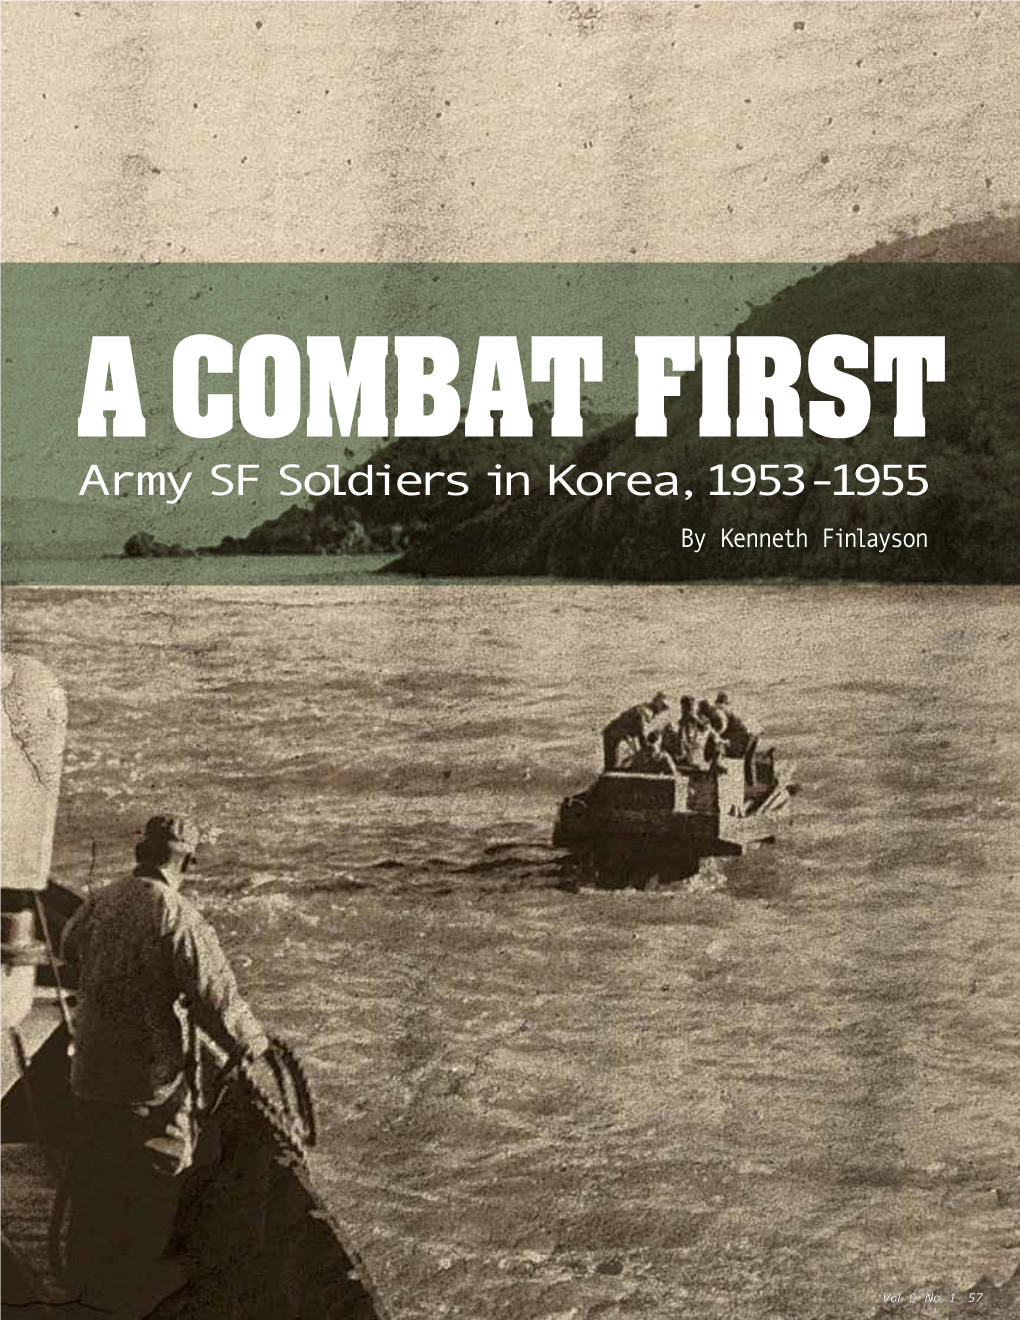 Army SF Soldiers in Korea, 1953-1955 by Kenneth Finlayson